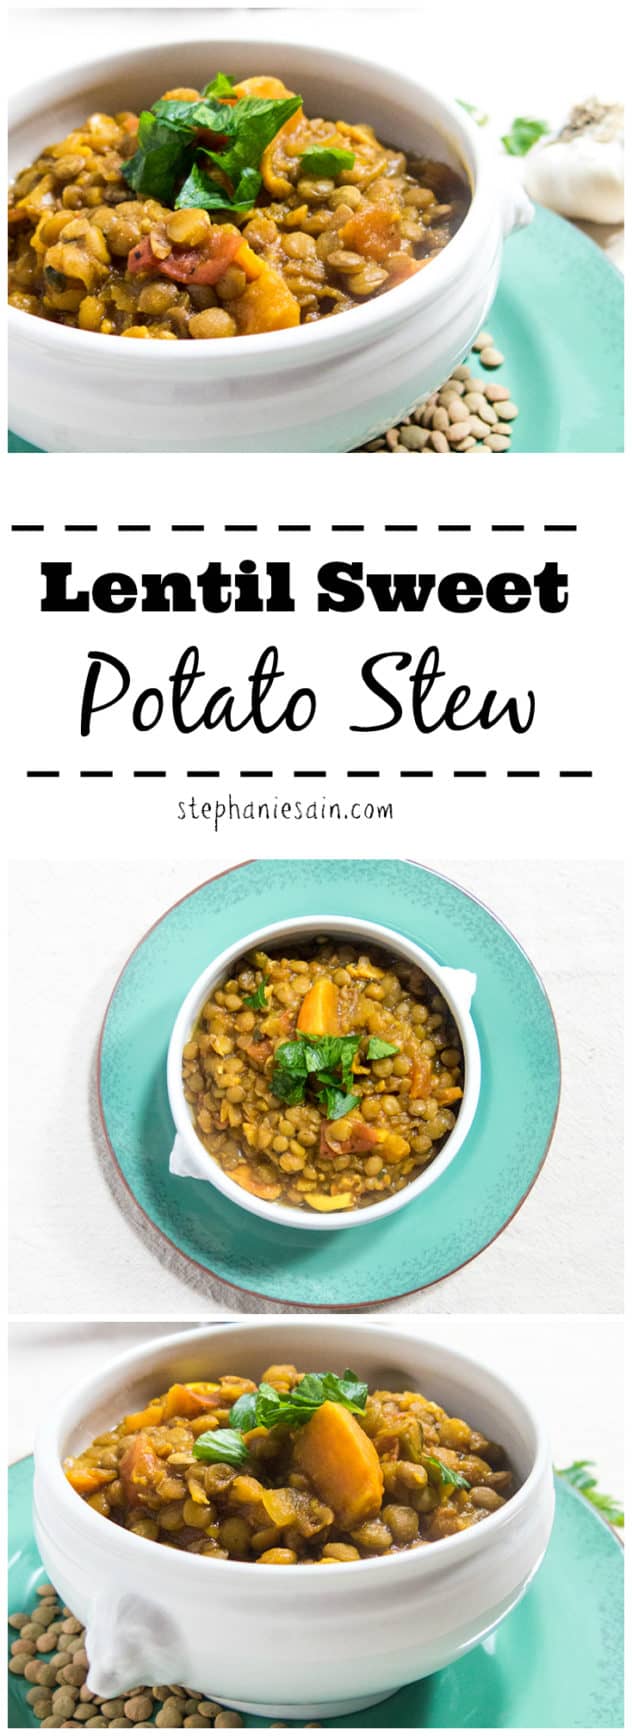 Lentil Sweet Potato Stew is a healthy, easy to prepare stew. Great vegetarian and gluten free stew that can be served alone or with muffins or a salad.